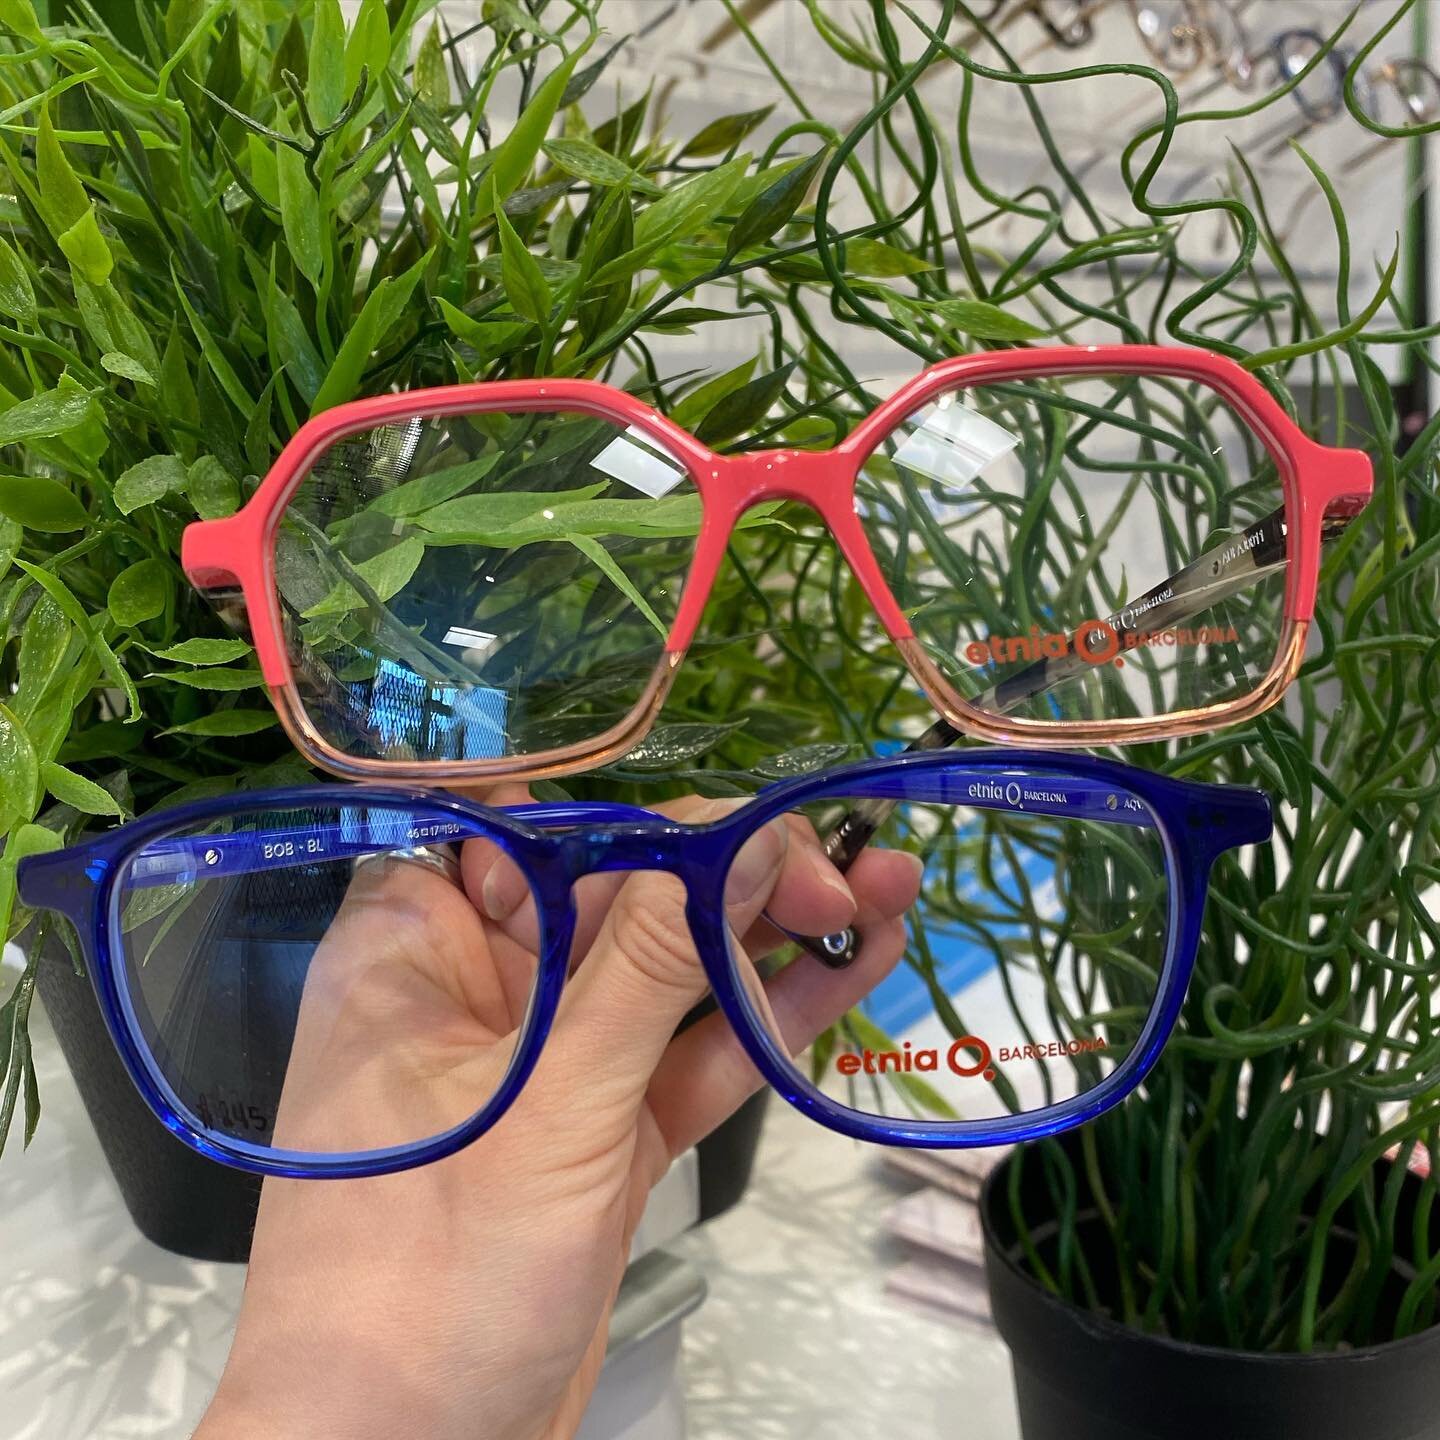 We&rsquo;re sure you love statement pieces as much as we do! All of our frames come in various colours for those of you who are looking to add a pop of colour to your look. Just ask if you want to see more styles!
.
.
.
.
#insightoptical #northburnab